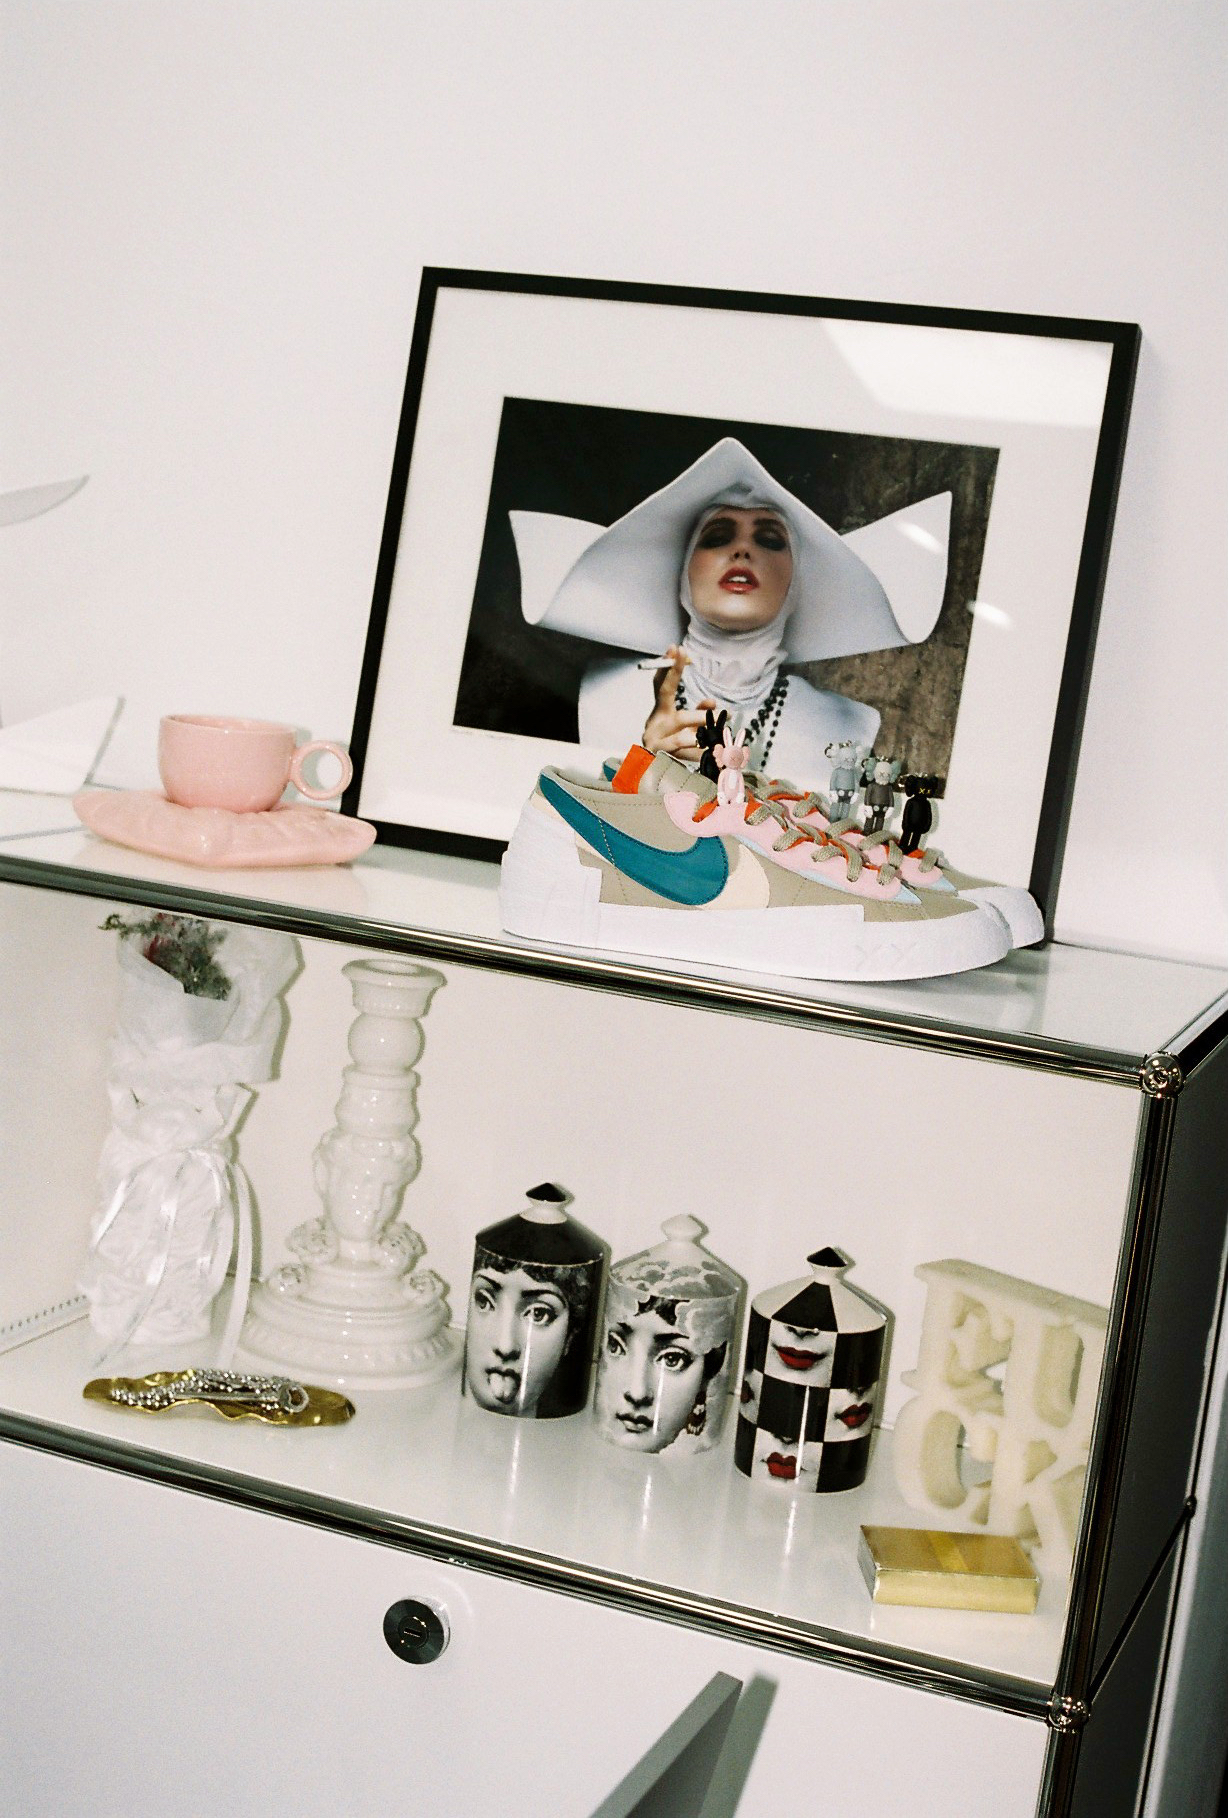 tidy shelves full of candles, jewellery and a pair of clean sneakers